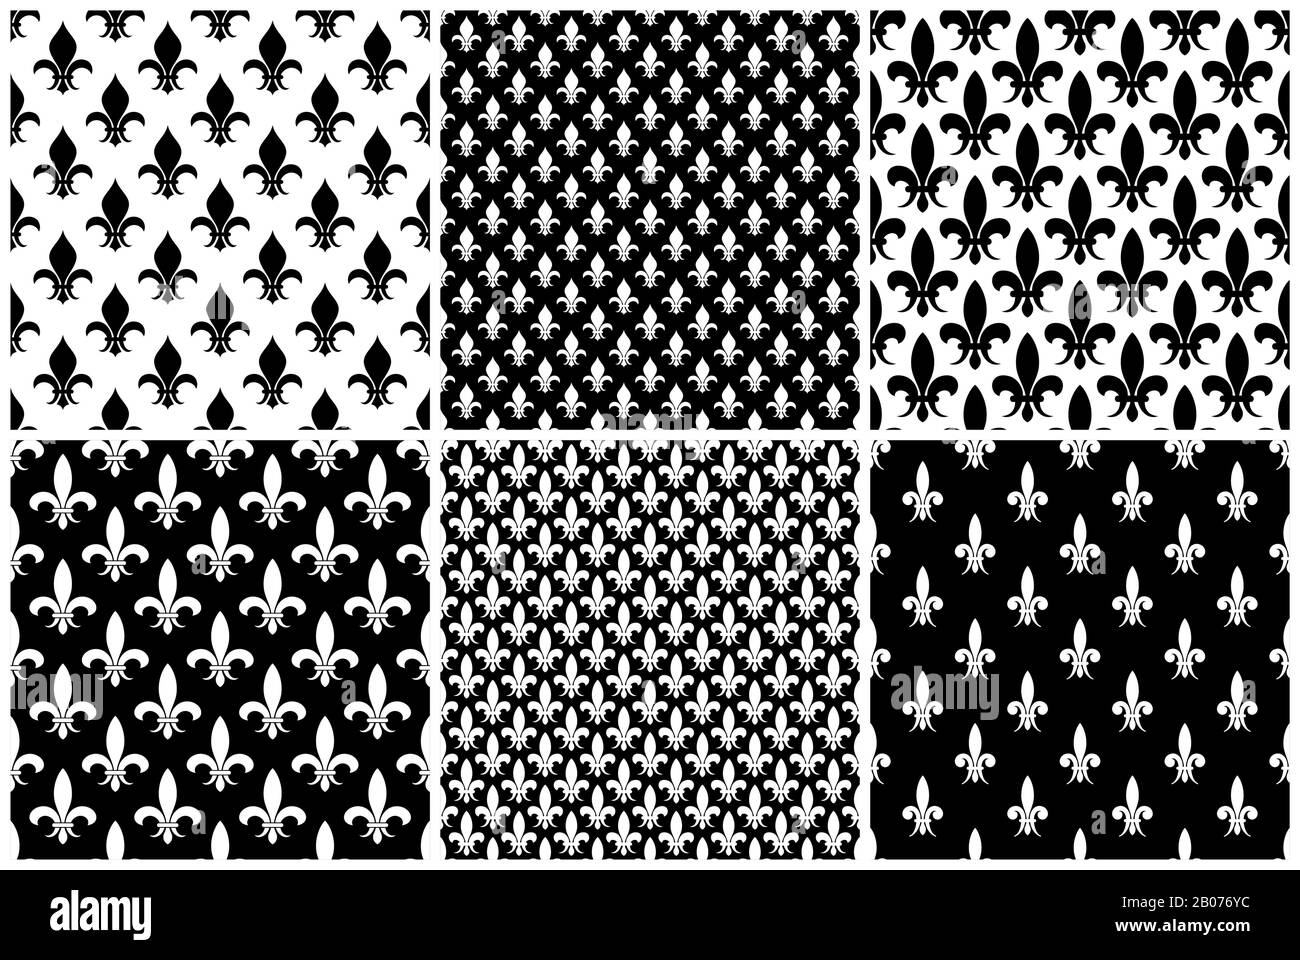 Vector fleur de lis seamless patterns set in black and white color. Illustration of background collection Stock Vector